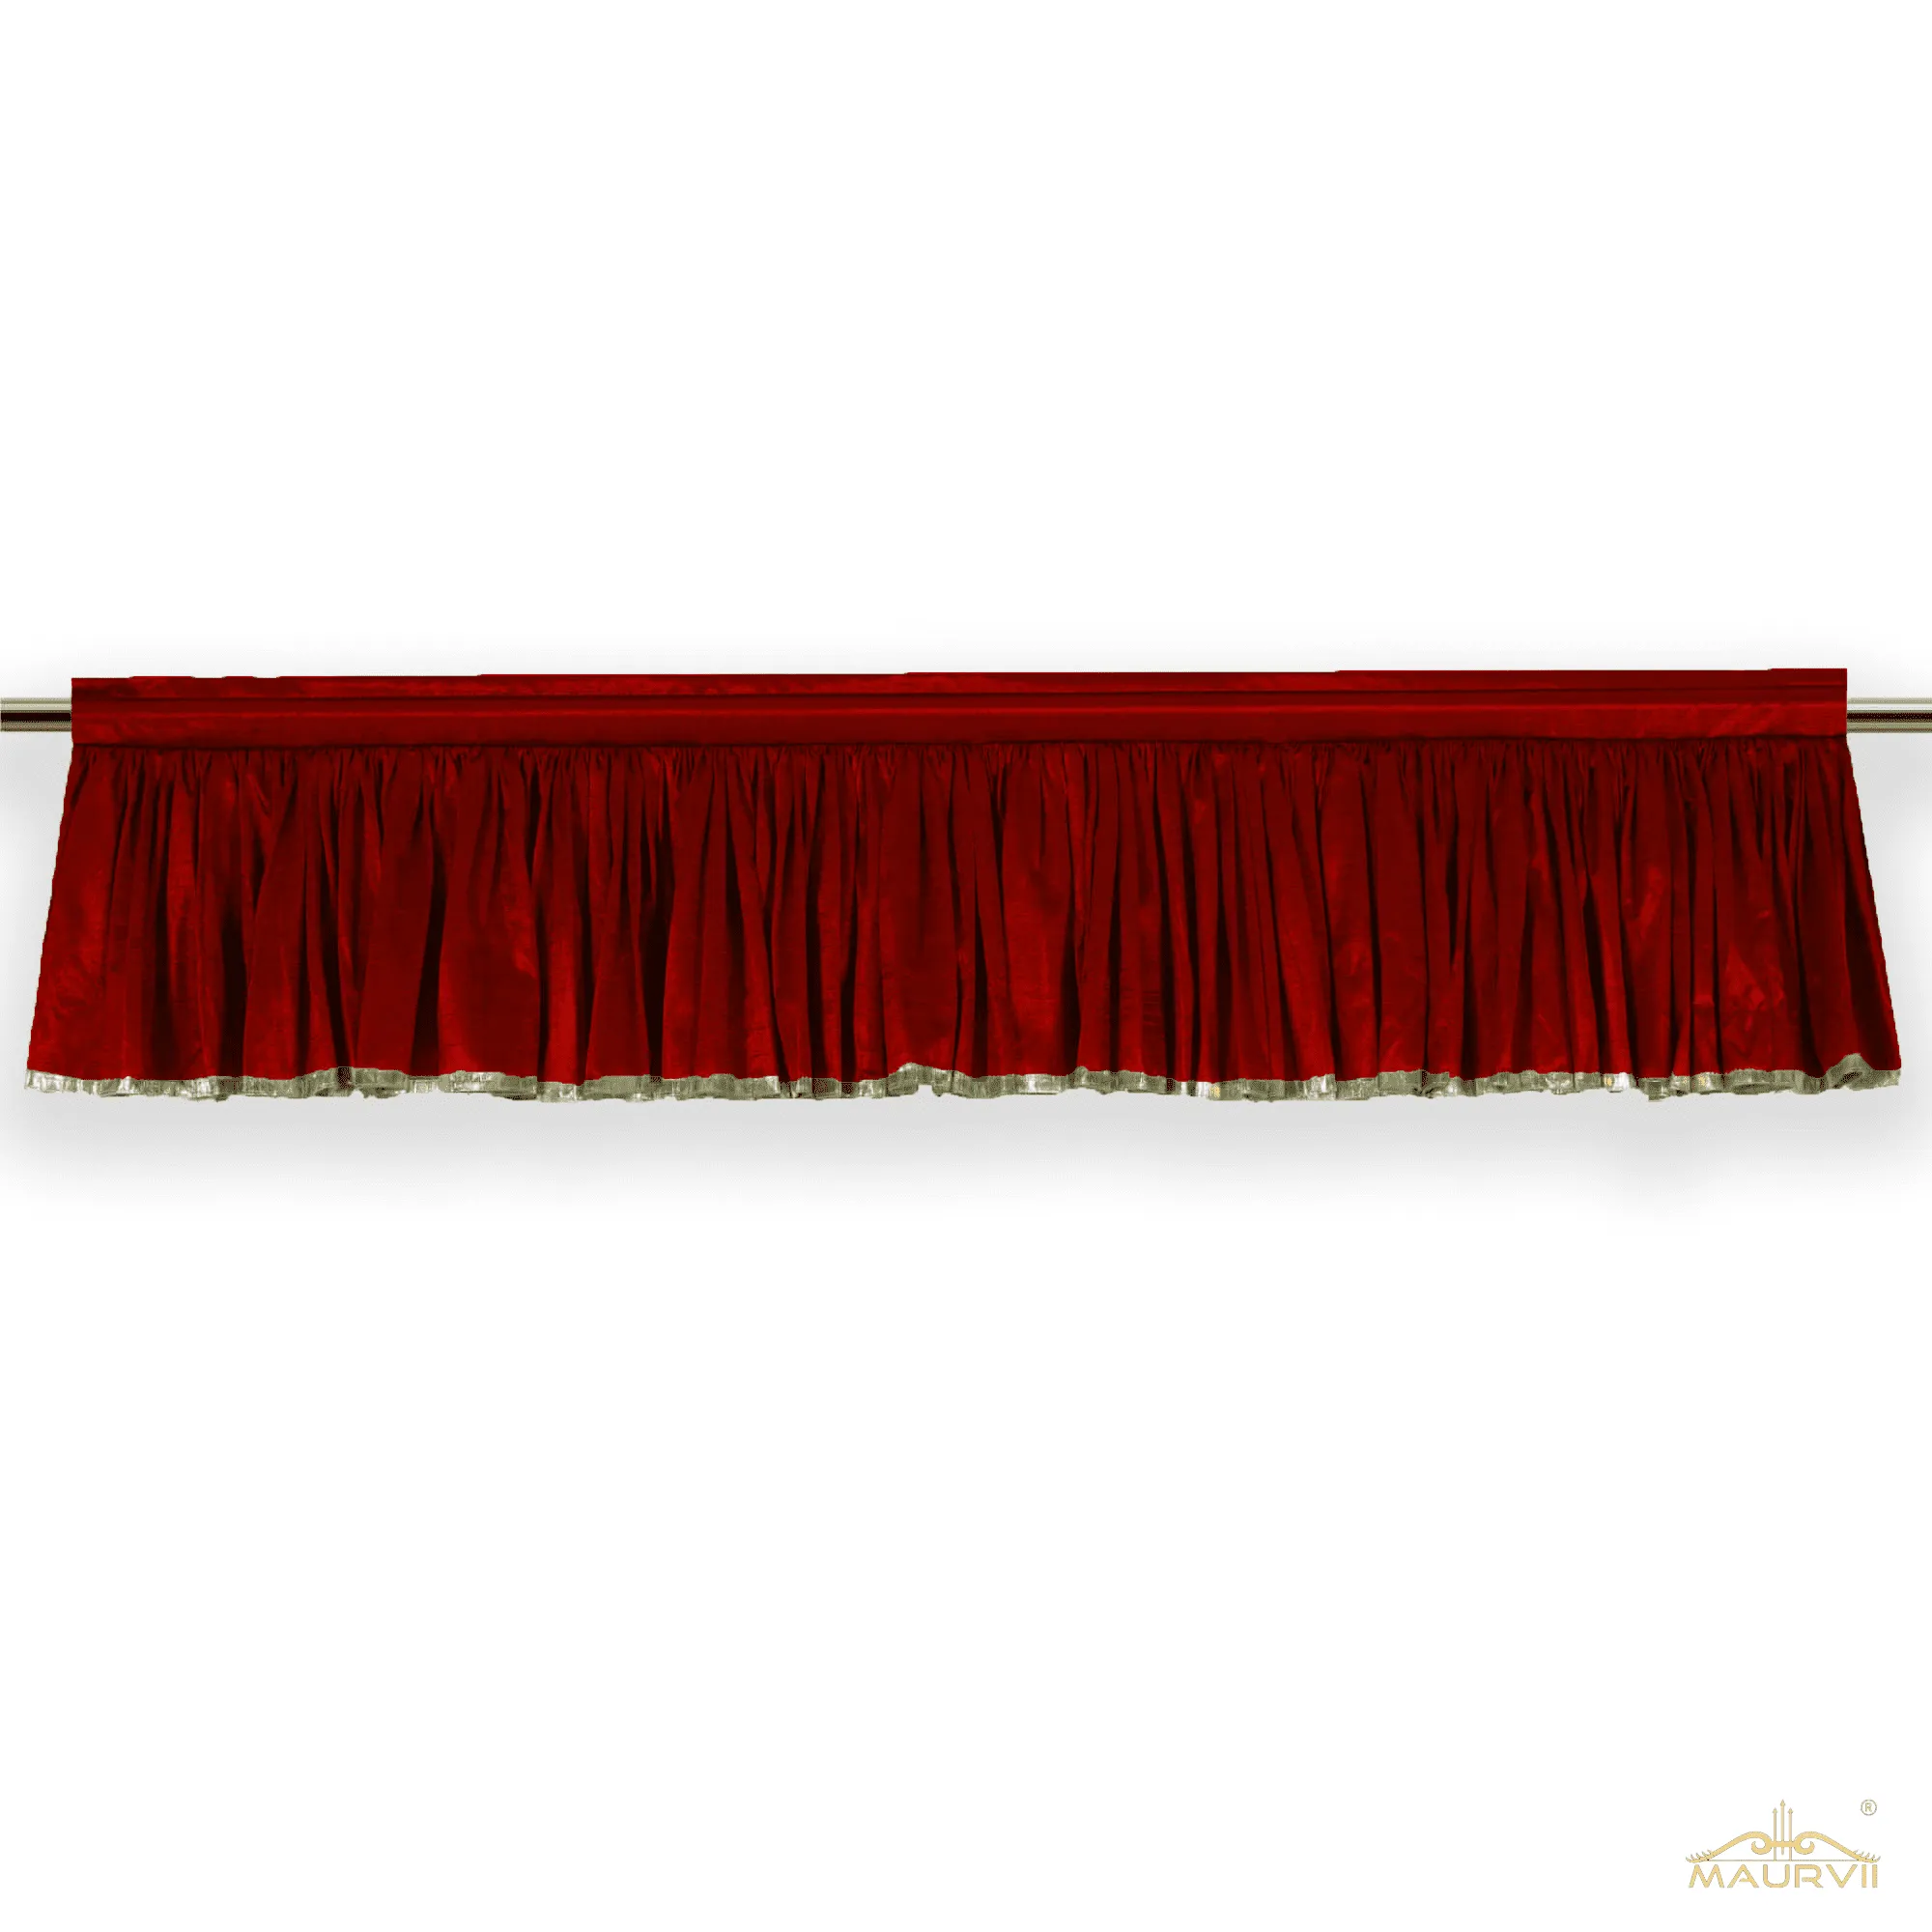 Red Pleated Valance installed with curtain rod